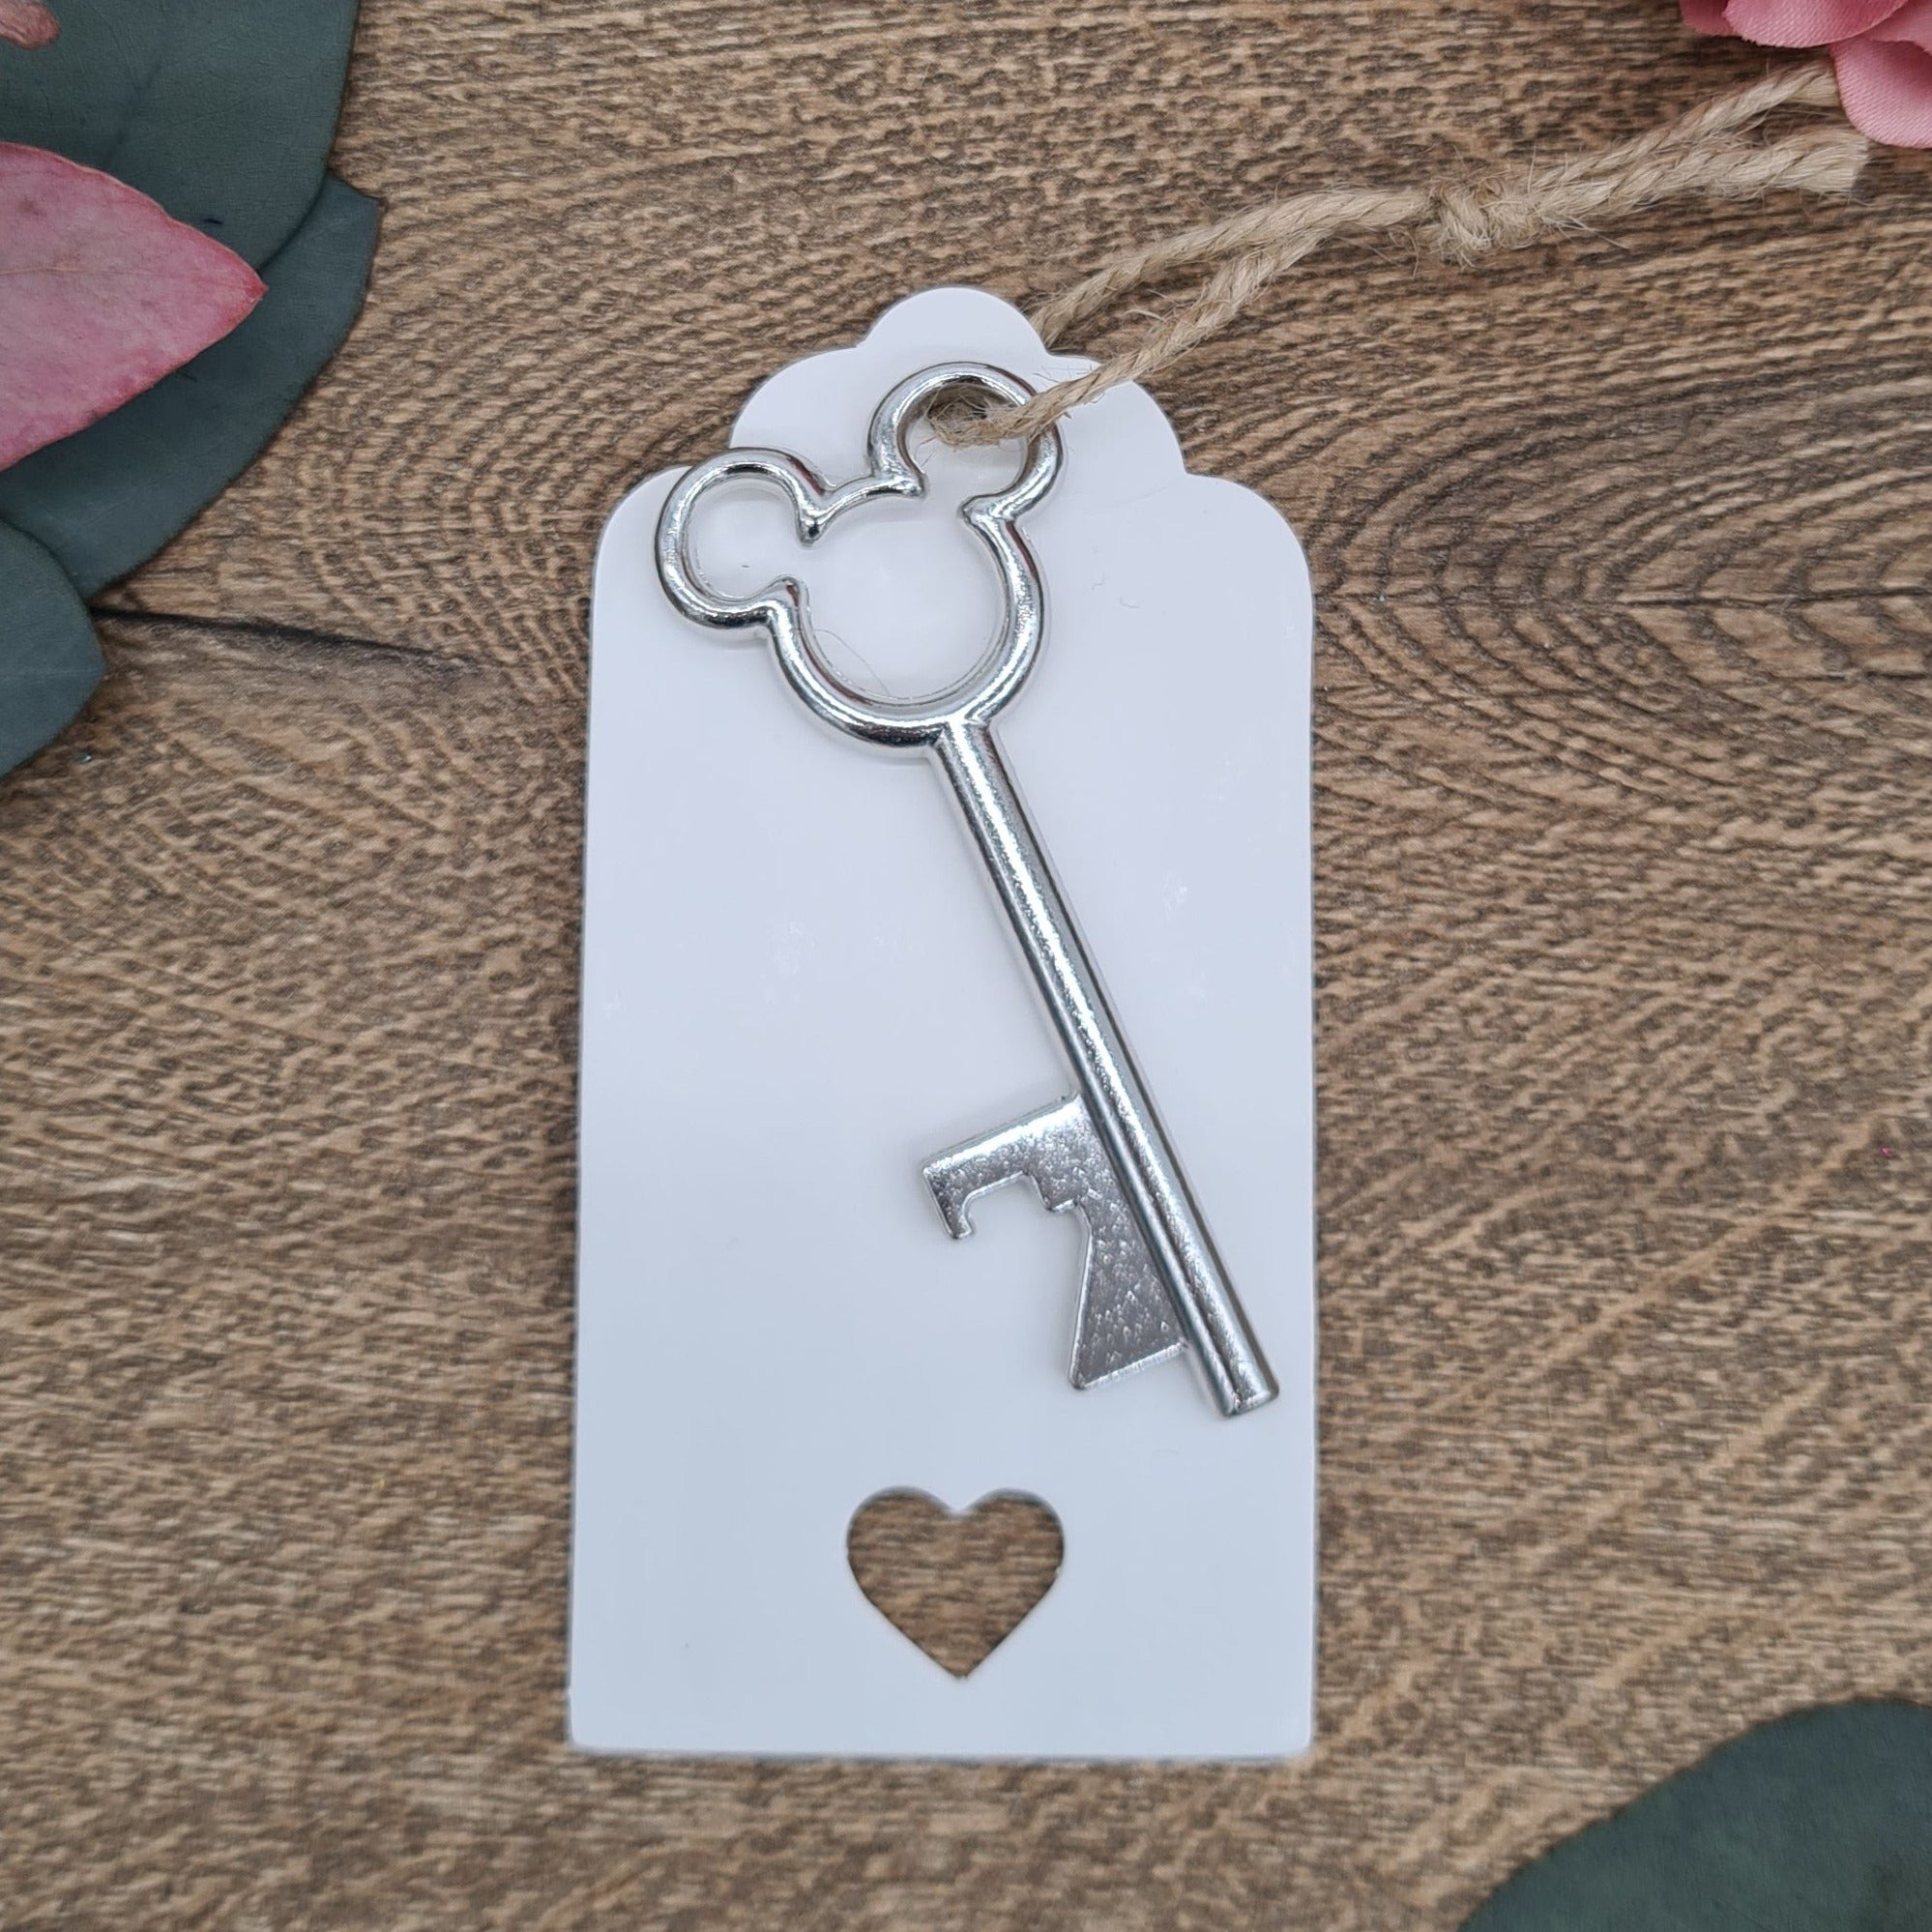 Mickey Keyring Key Bottle Opener Silver Guest Gift Favor Fairytale Wedding Party Name Card Promotional Gift